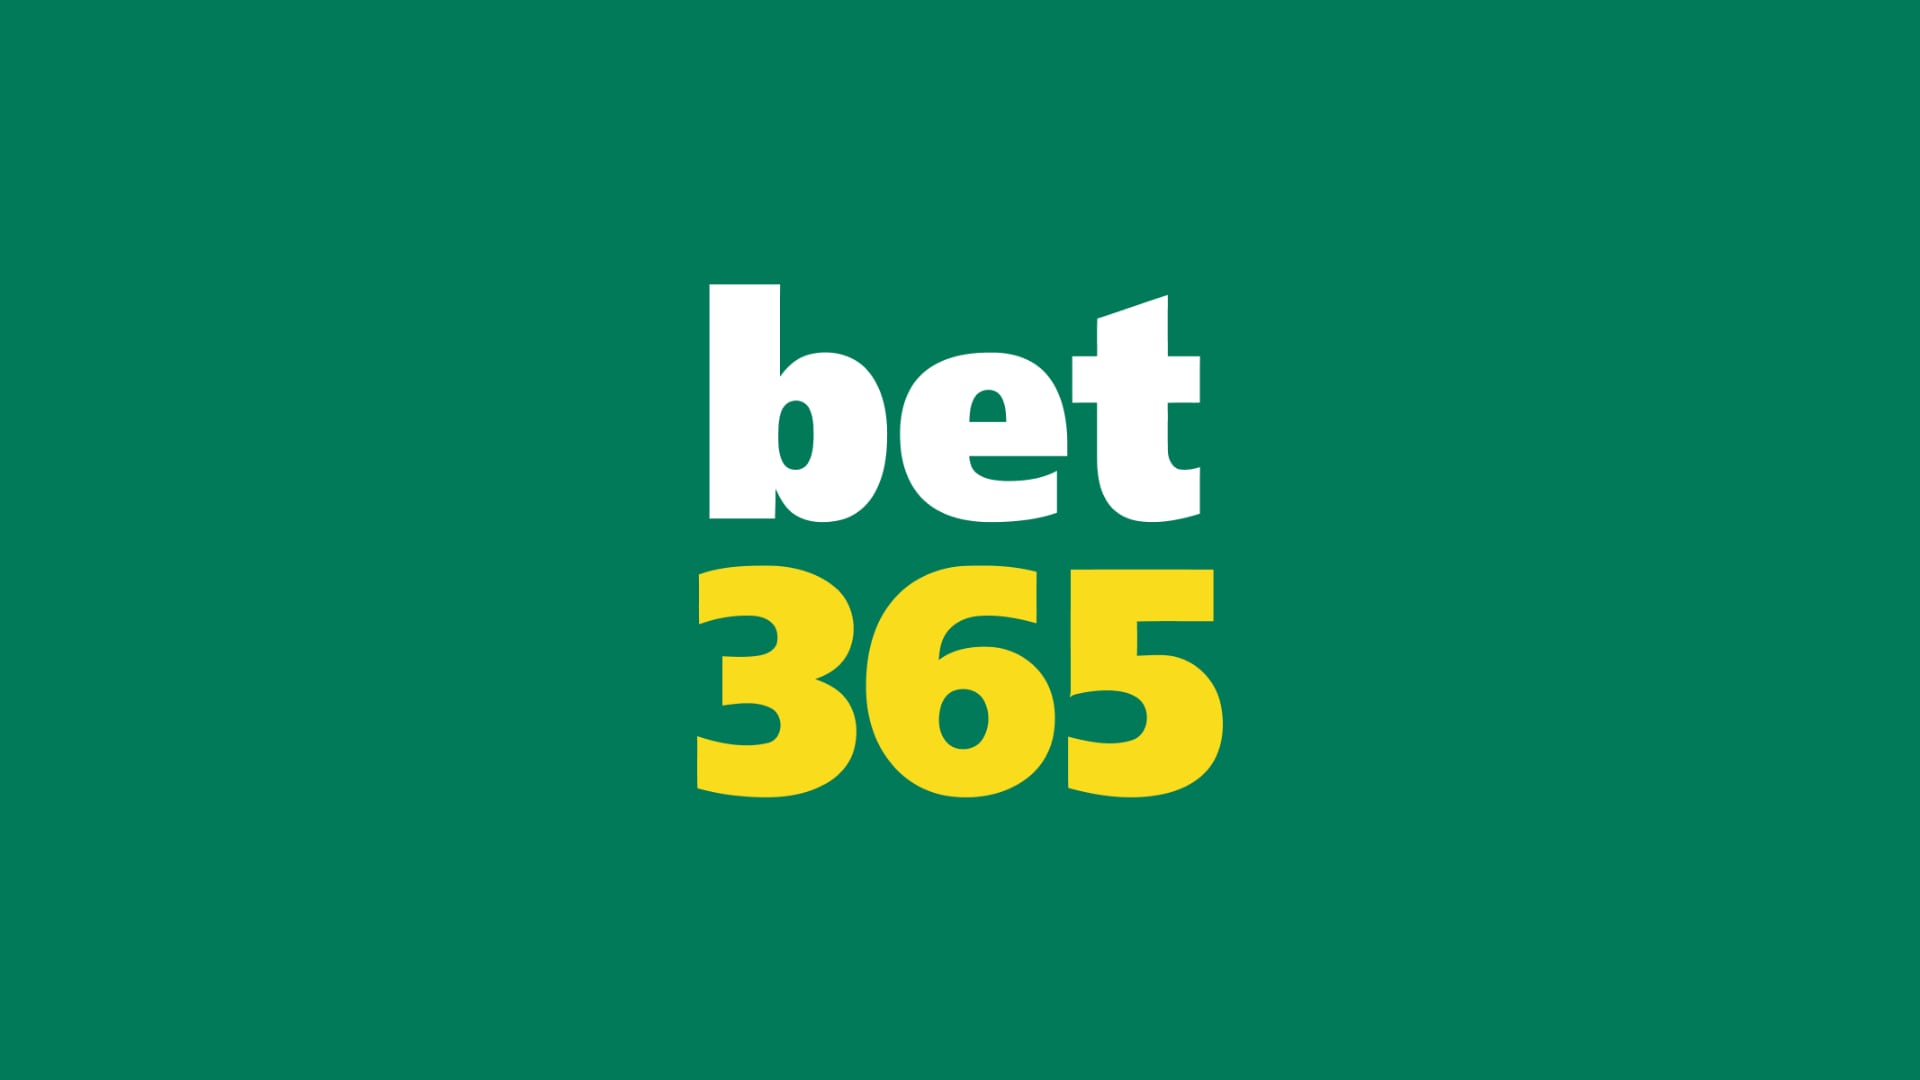 Free Bet365 bets every week simply by logging in - Mirror Online